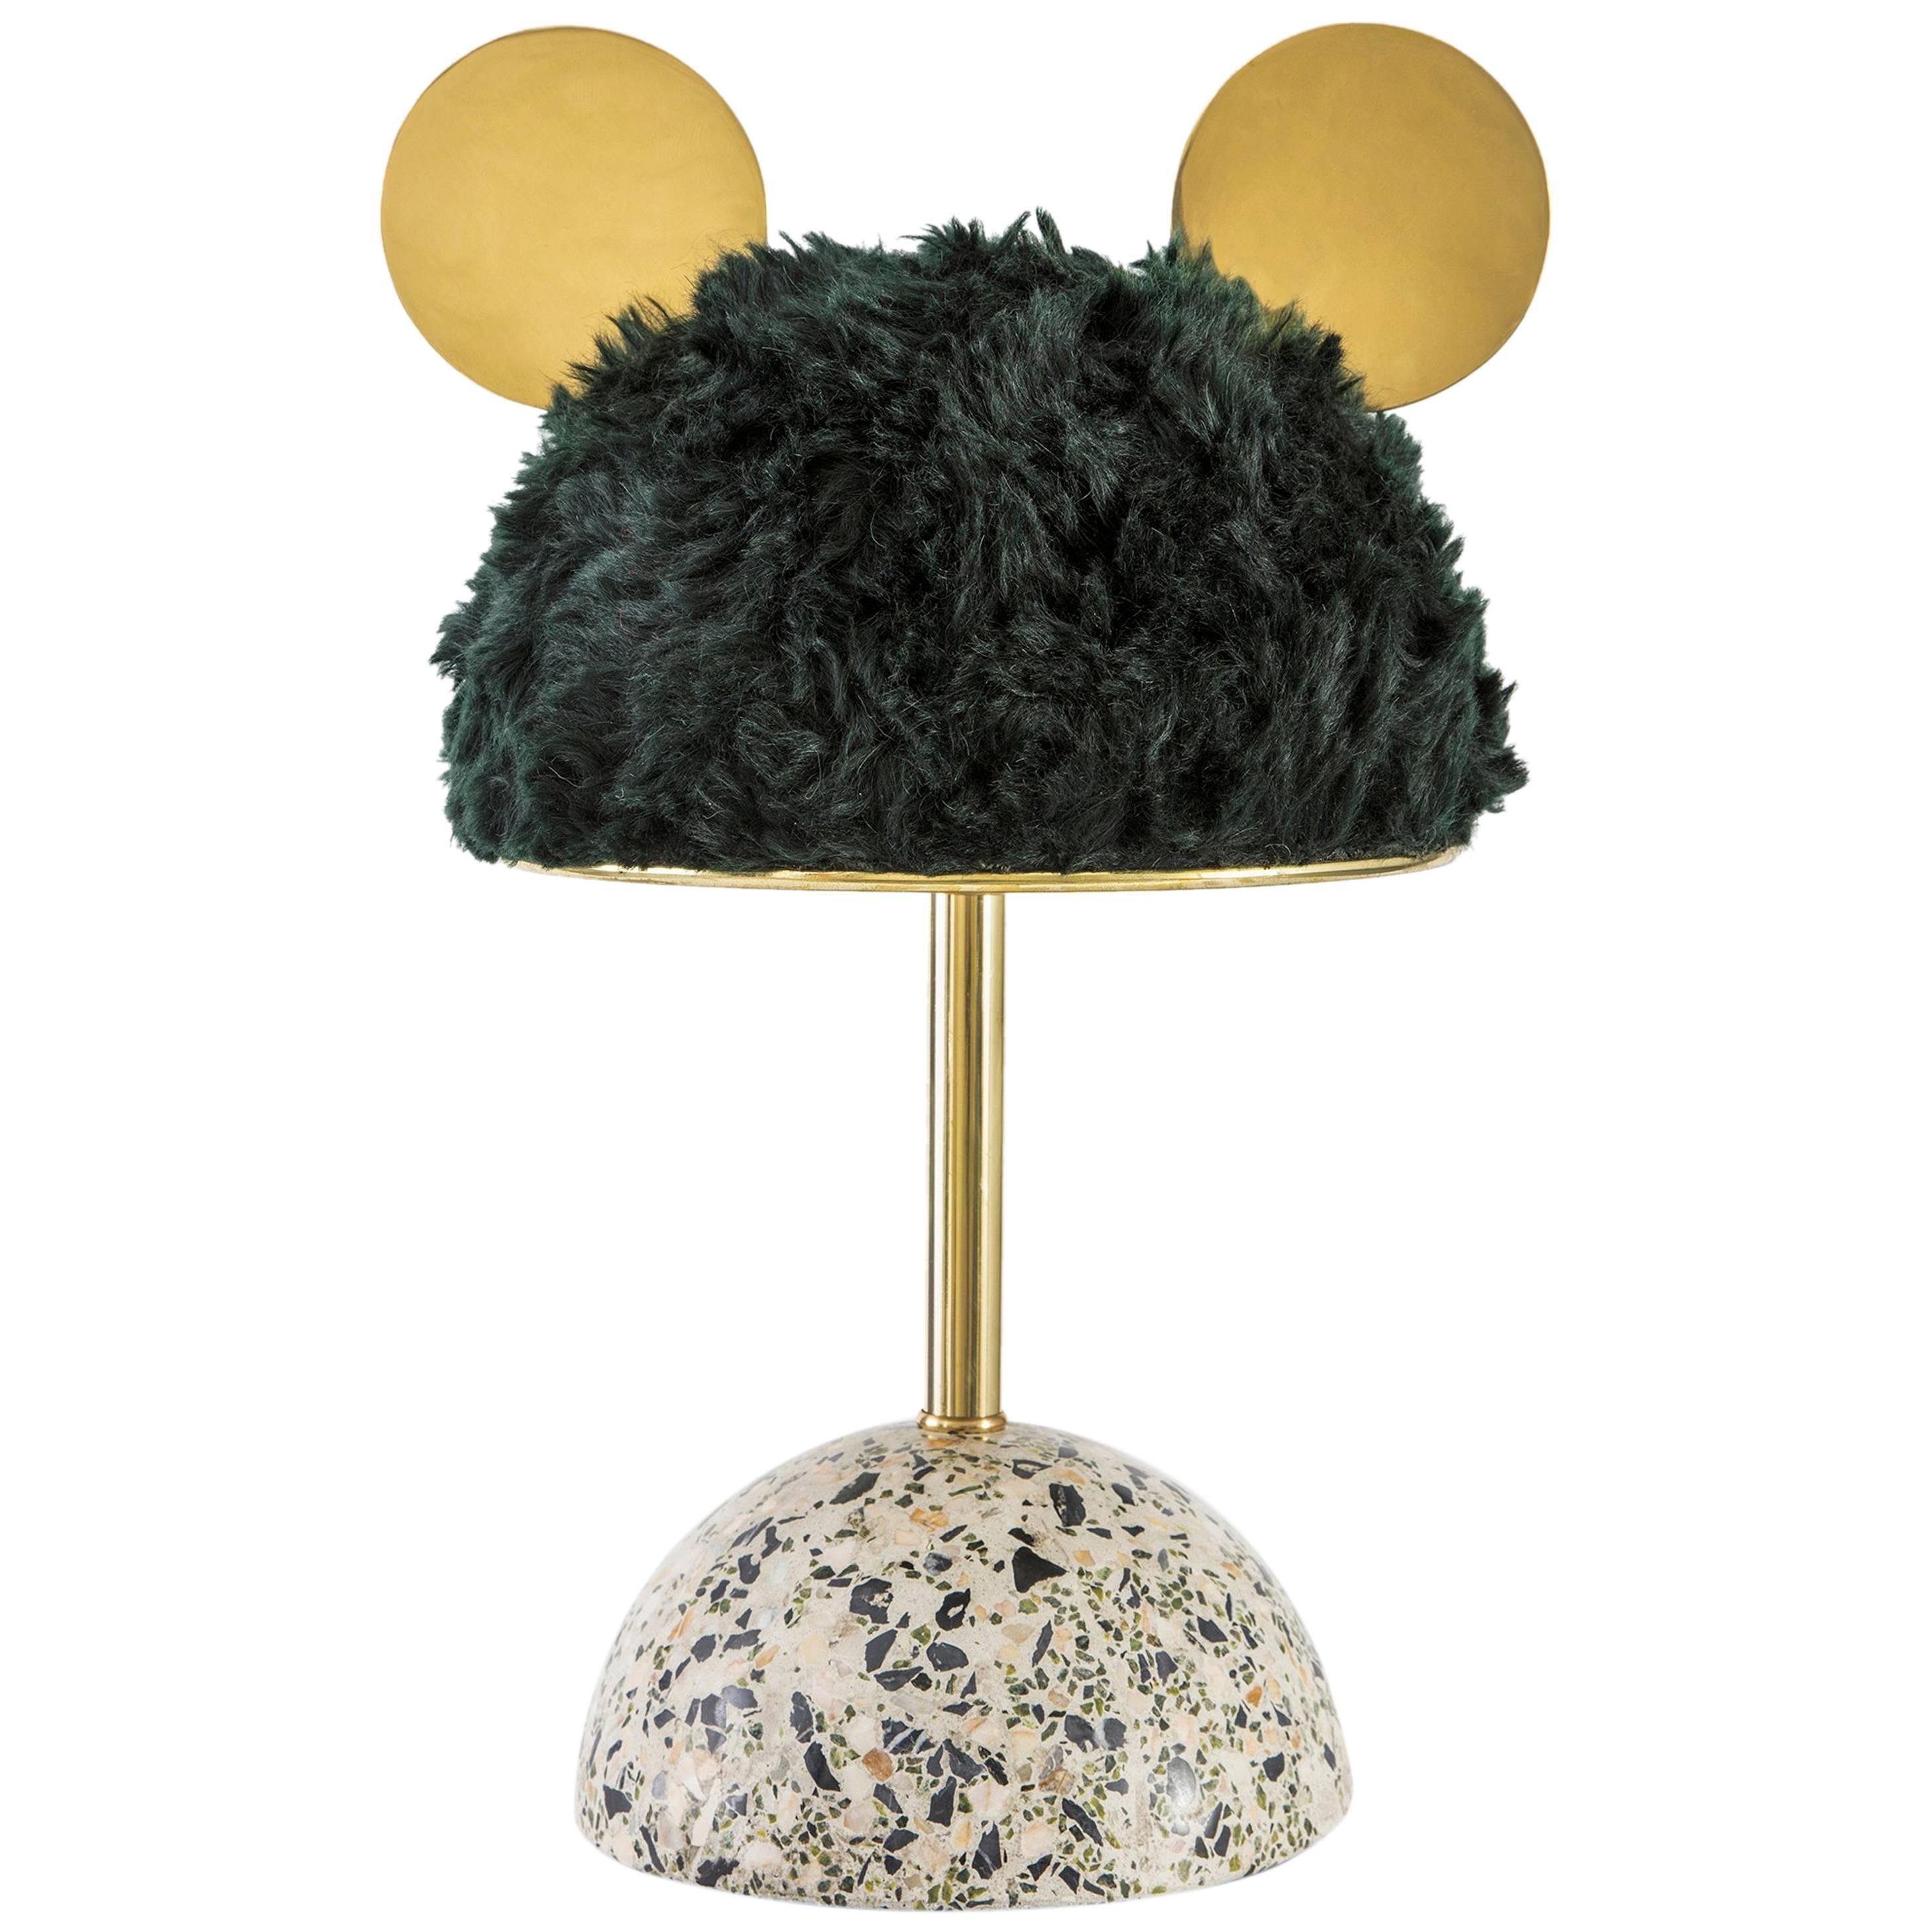 21st Century Minos Table Lamp in Green Mohair, Terrazzo and Polished Brass